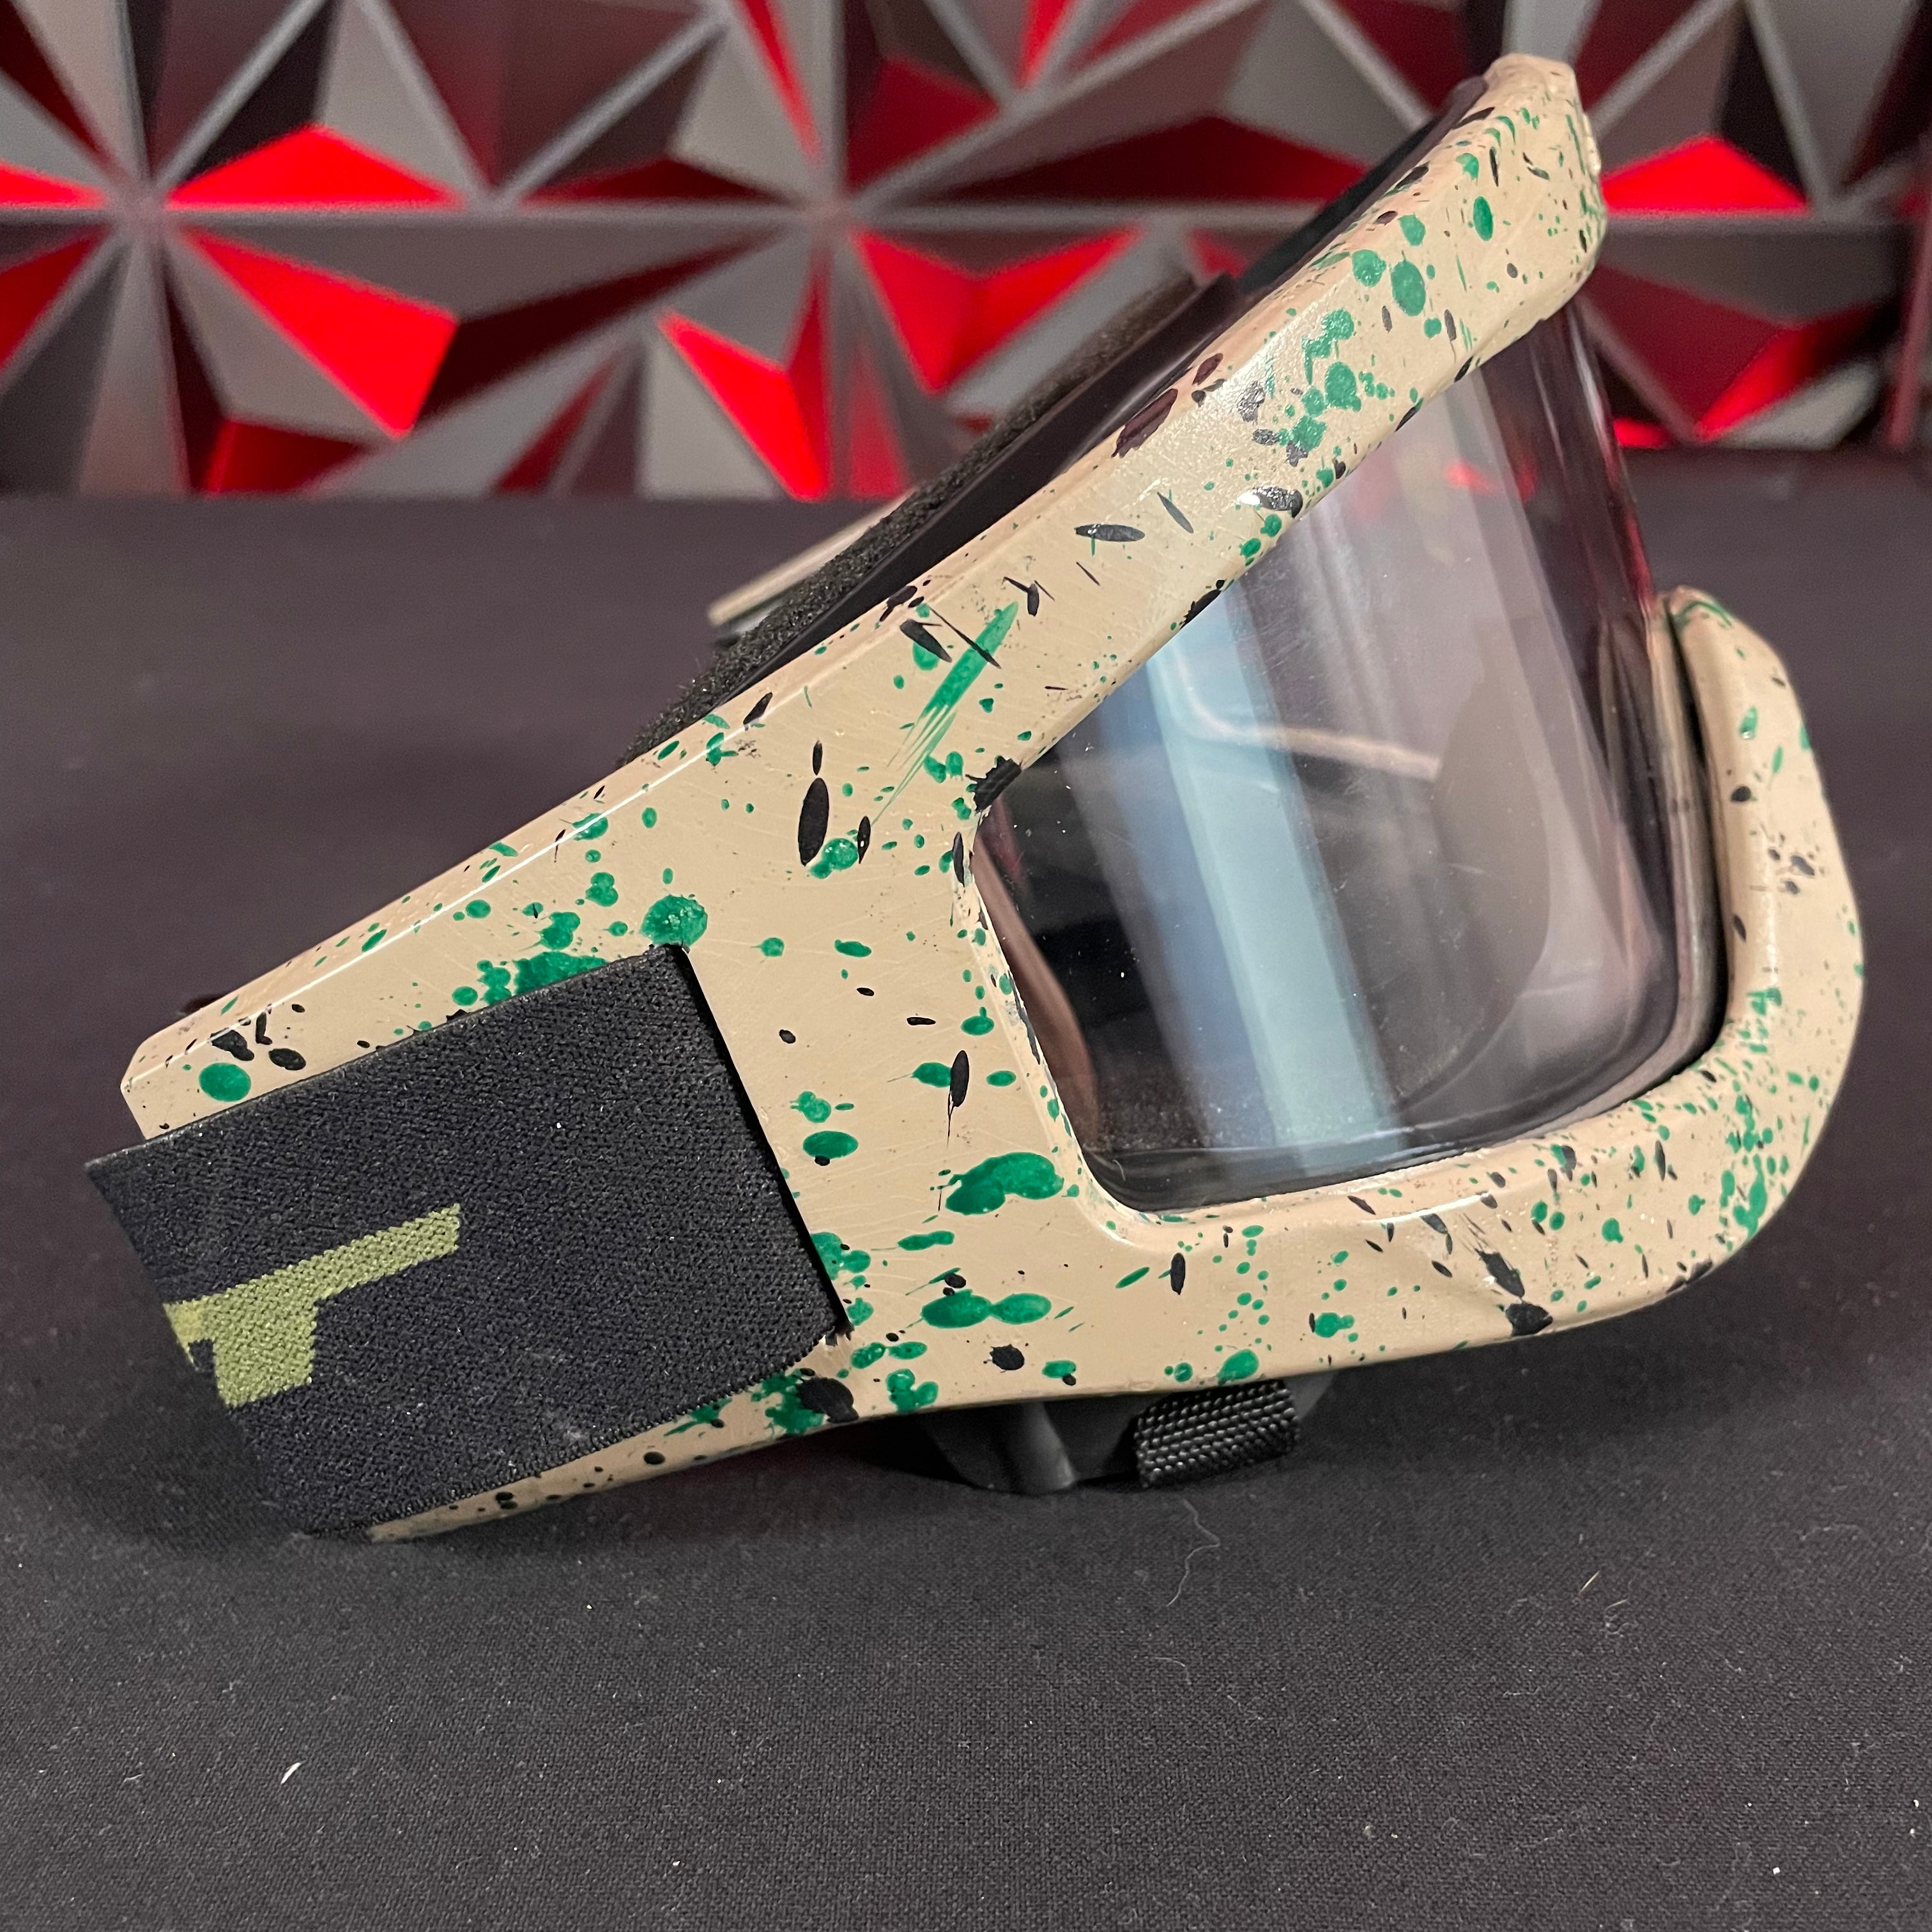 Used JT Proflex Paintball Mask Frame - Tan Speckled